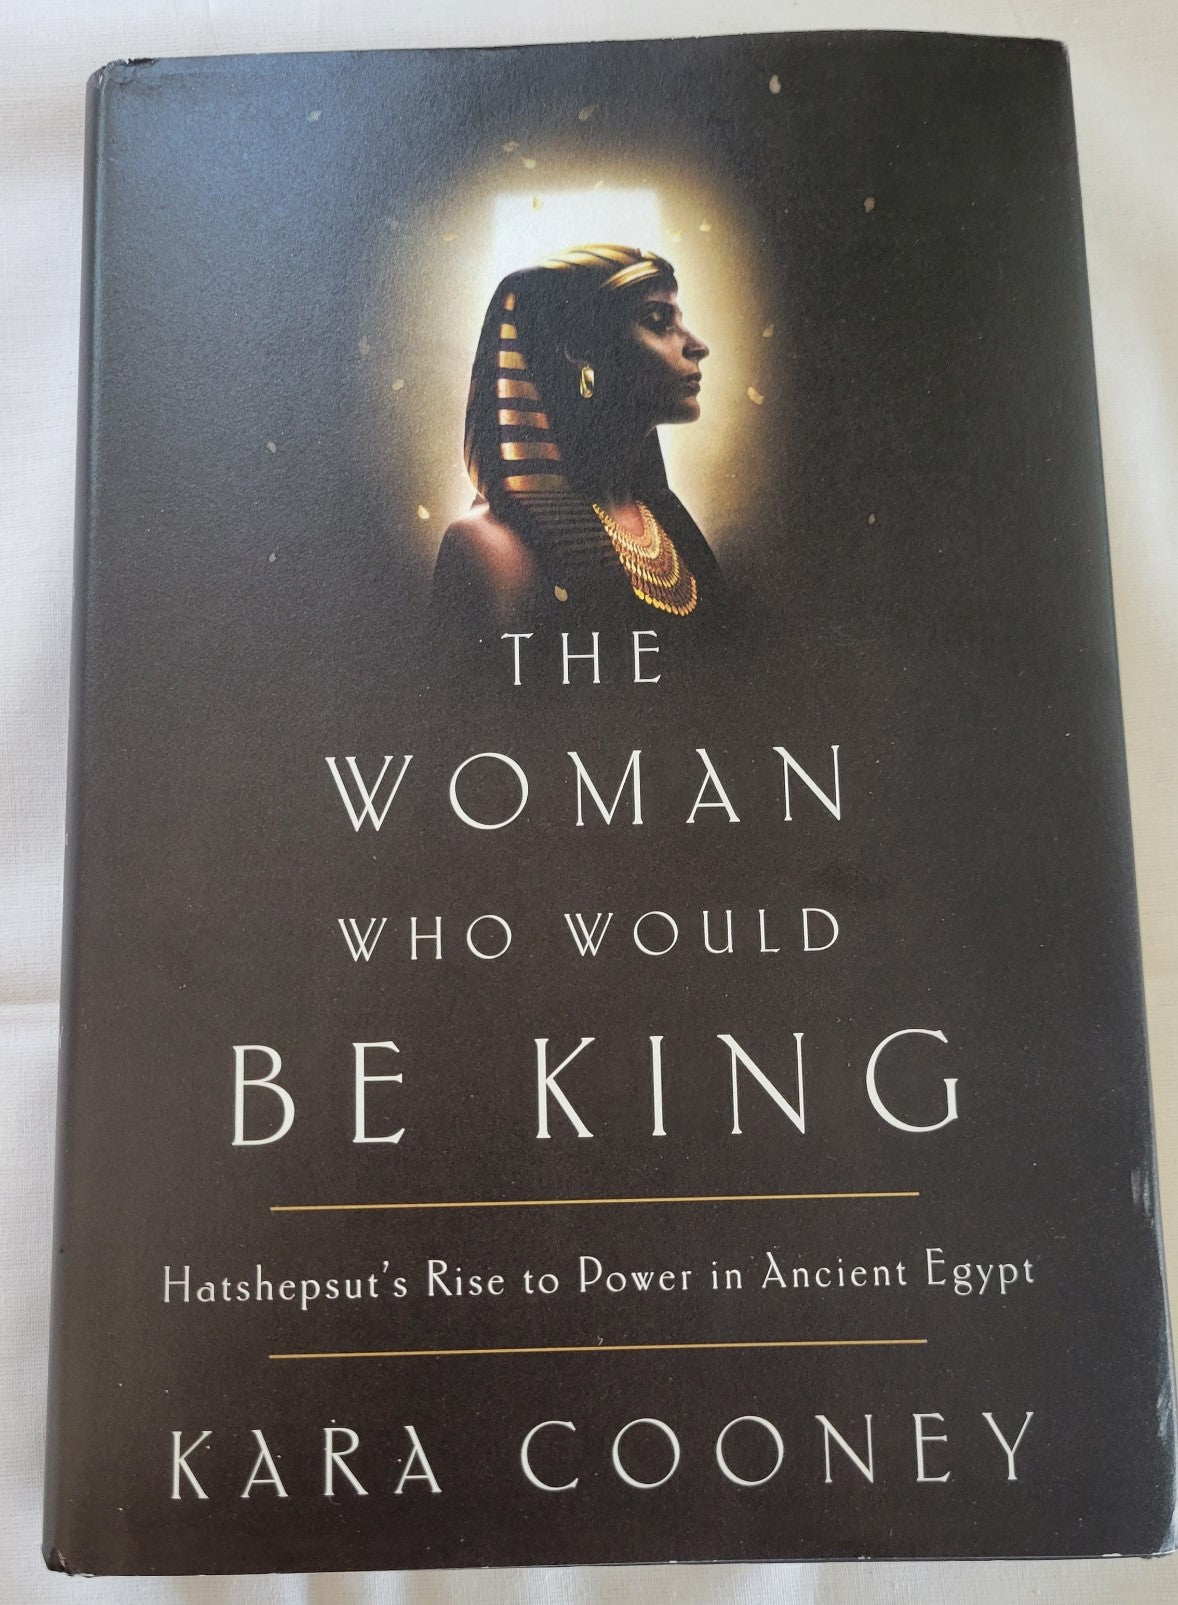 Used book for sale “The Woman Who Would Be King” written by Kara Cooney. Front cover.